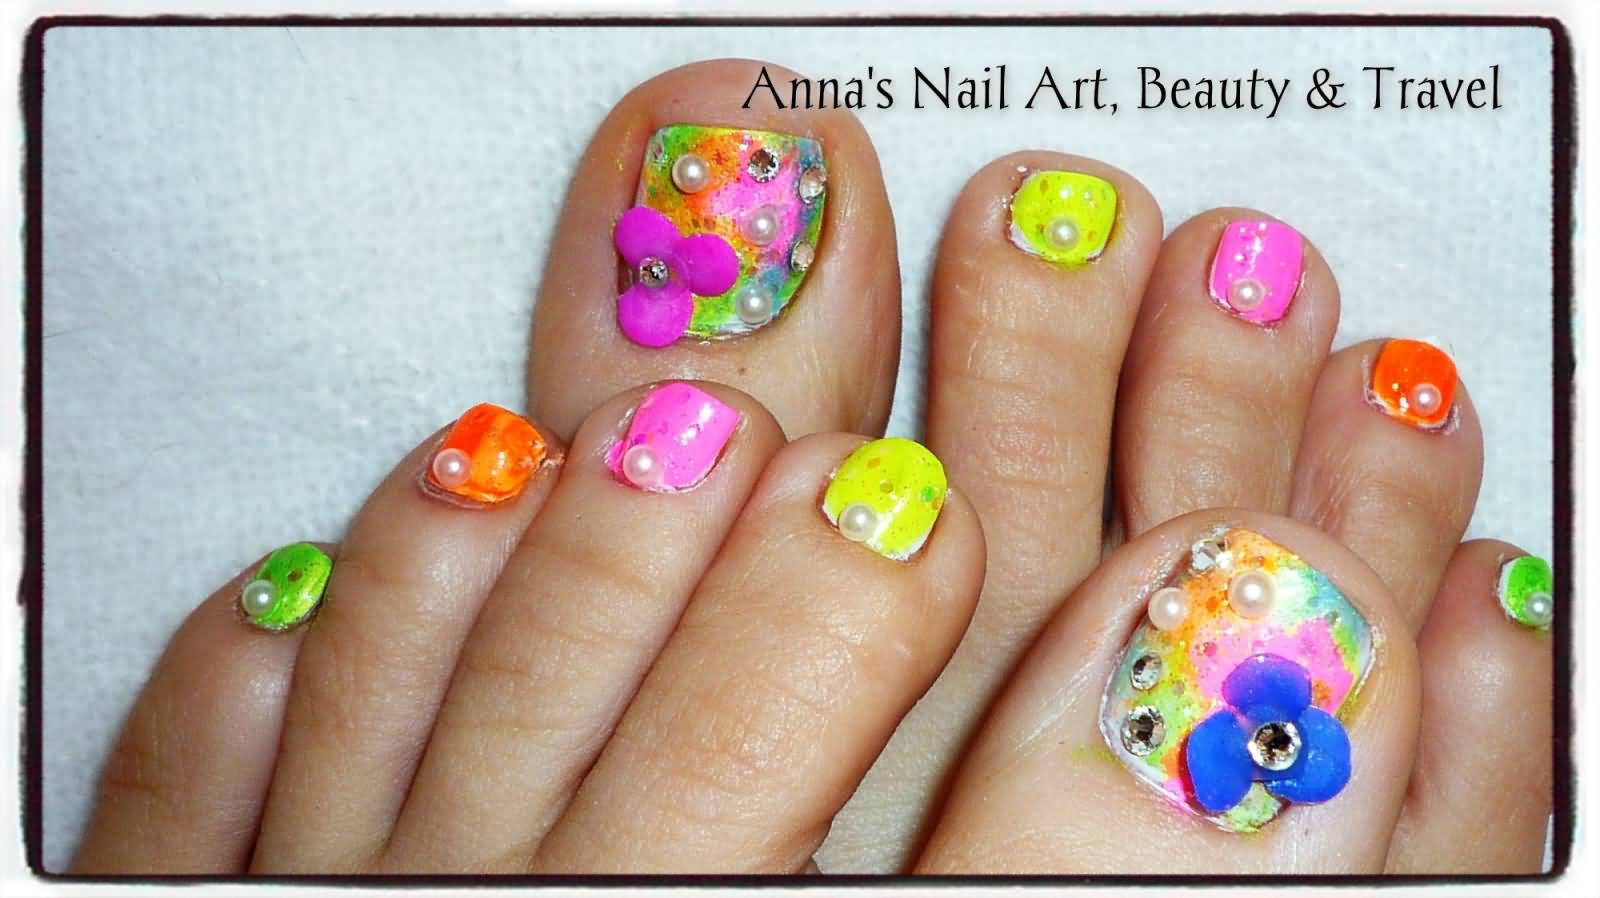 Colorful Spring Toe Nails With Pearls Design Idea With Tutorial Video